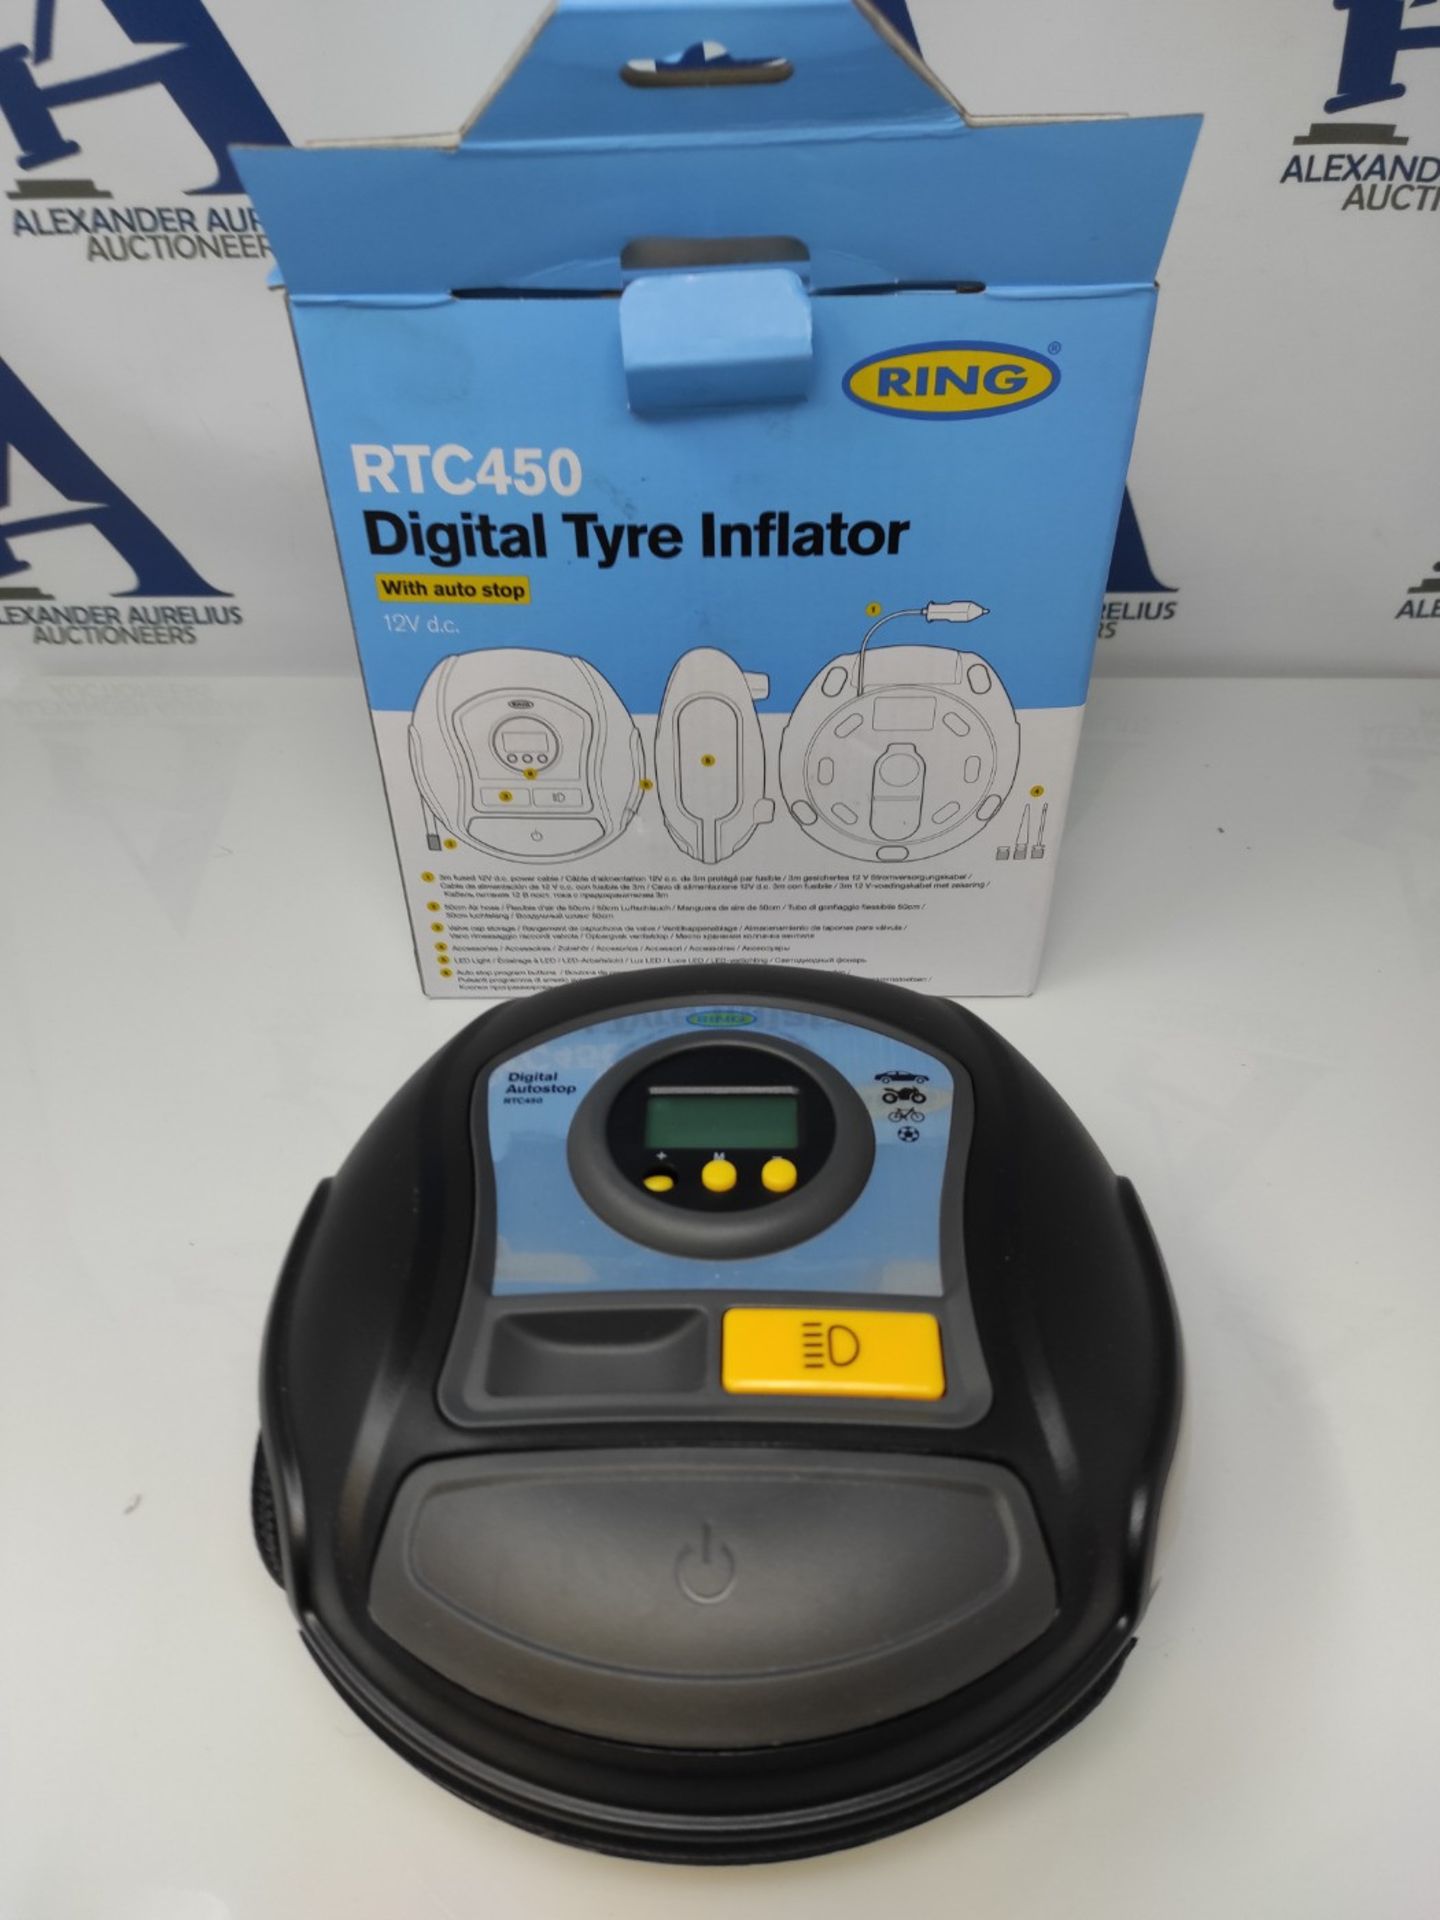 Ring Automotive - RTC450 Digital Tyre Inflator with Auto Stop, Memory, LED Light, Back - Image 2 of 2